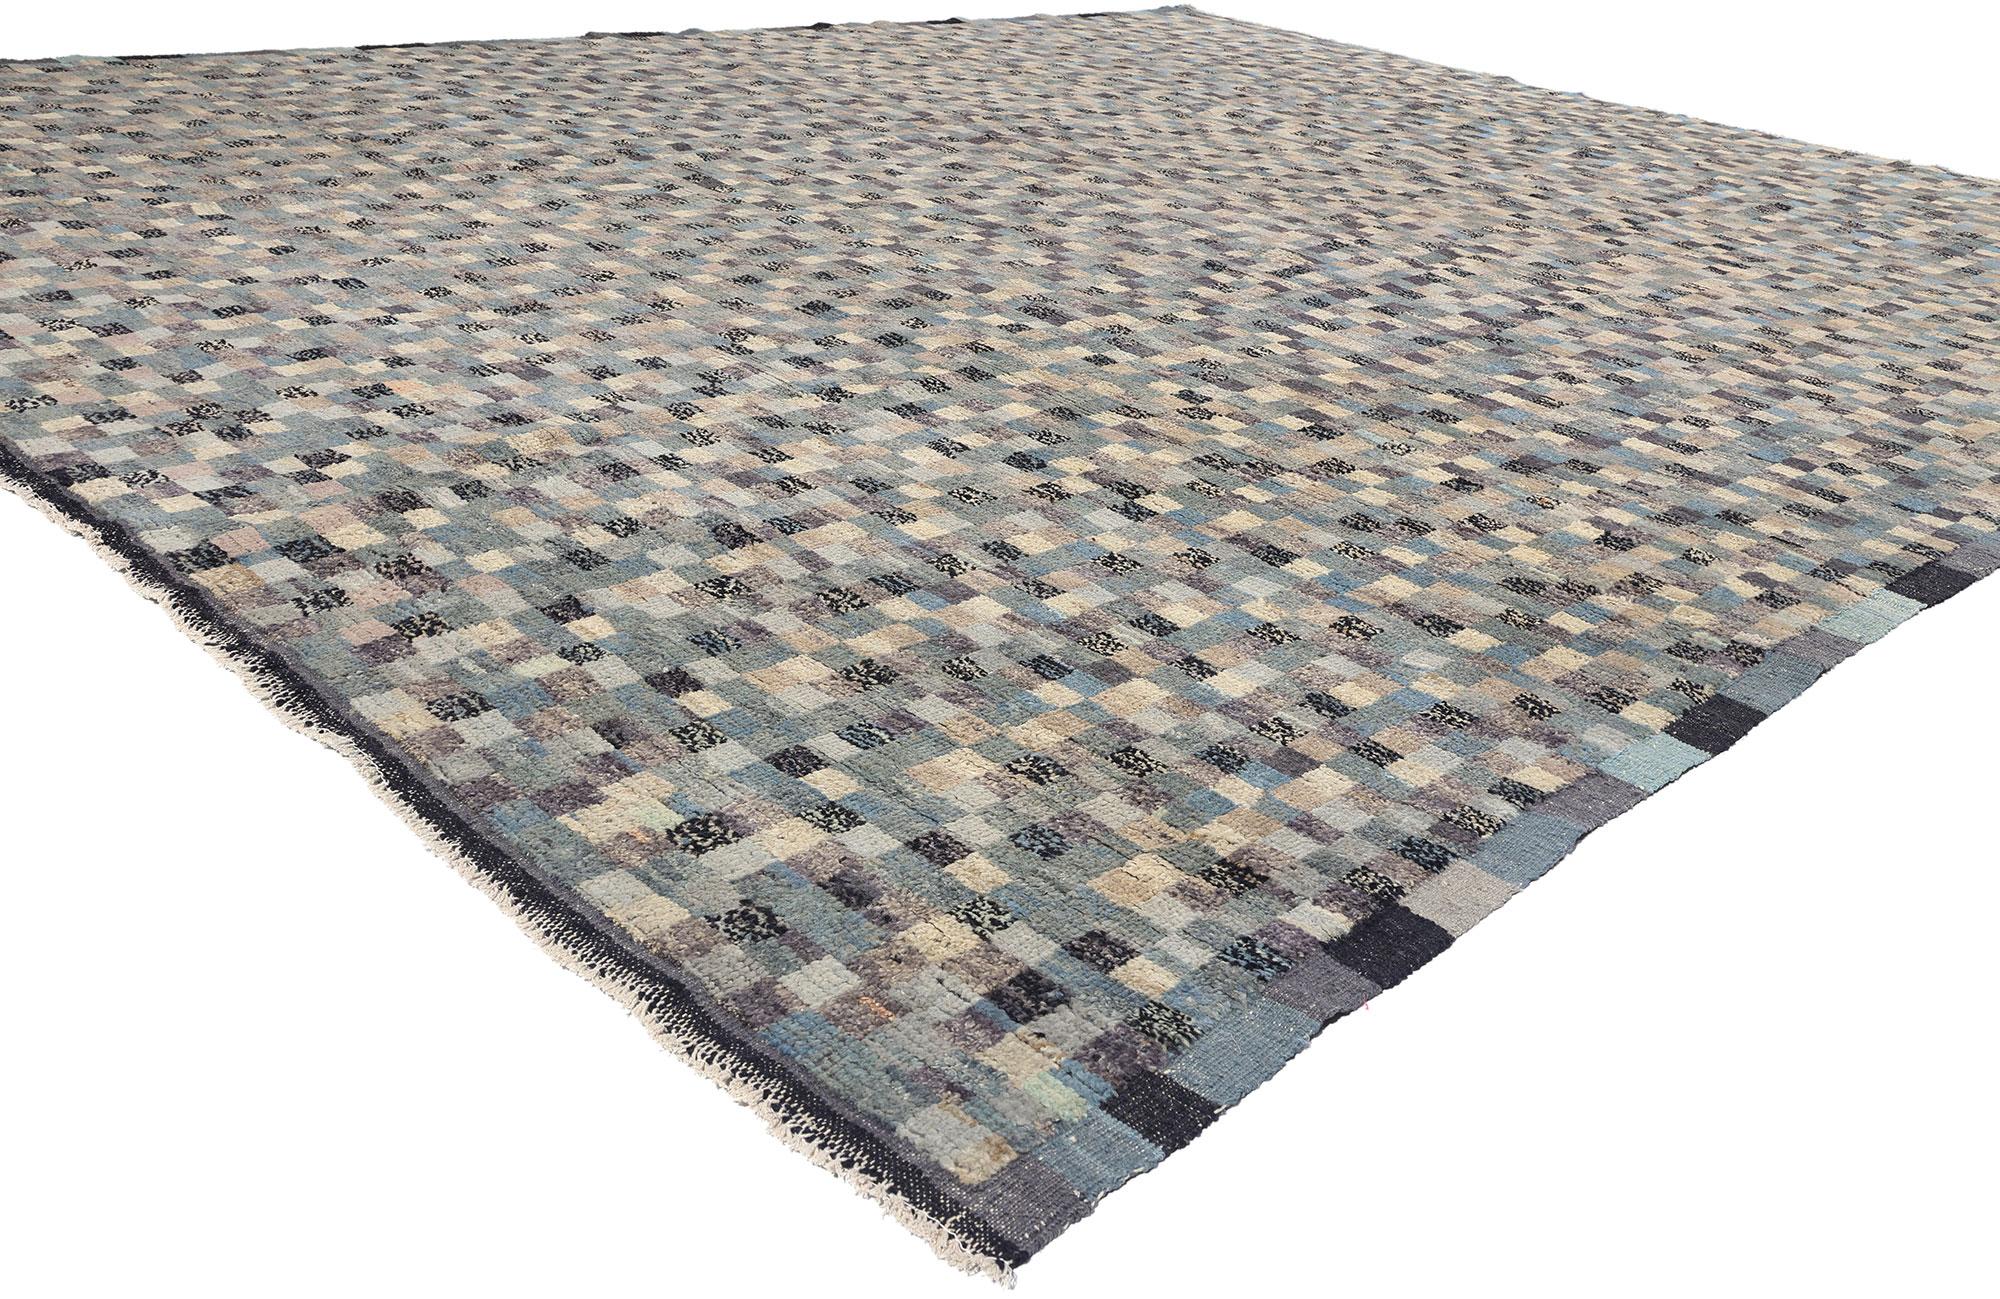 81053 Modern Bauhaus Checkered Moroccan Rug, 12'02 x 15'00. Enter a realm where the collision of artistic movements and the metamorphosis of cultural heritage conjure an atmosphere of dark elegance in this hand-knotted wool Modern Moroccan rug. This